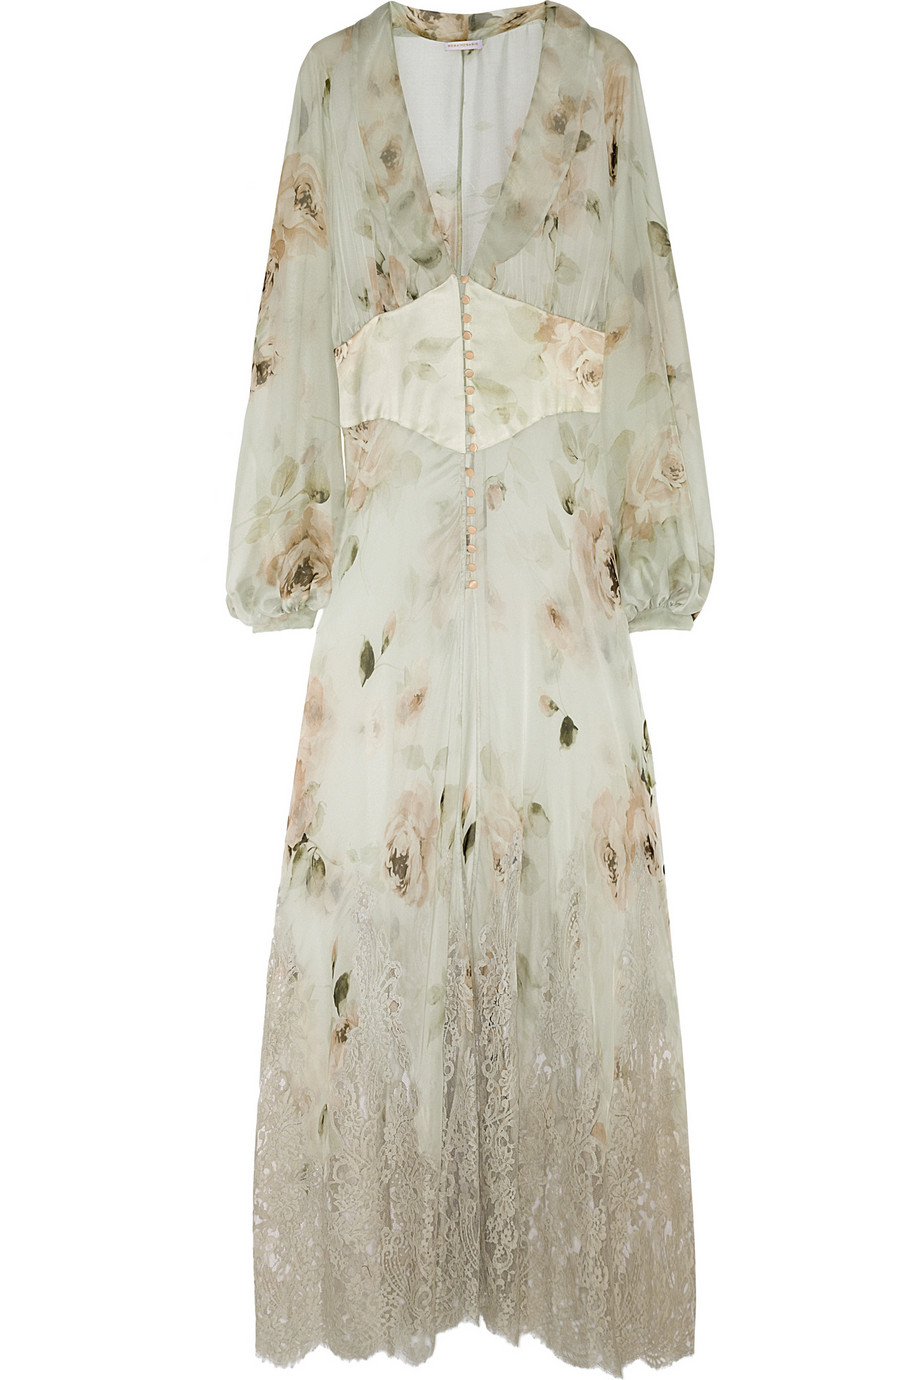 Lyst - Rosamosario Lace-Trimmed Printed Silk-Chiffon Robe in Natural